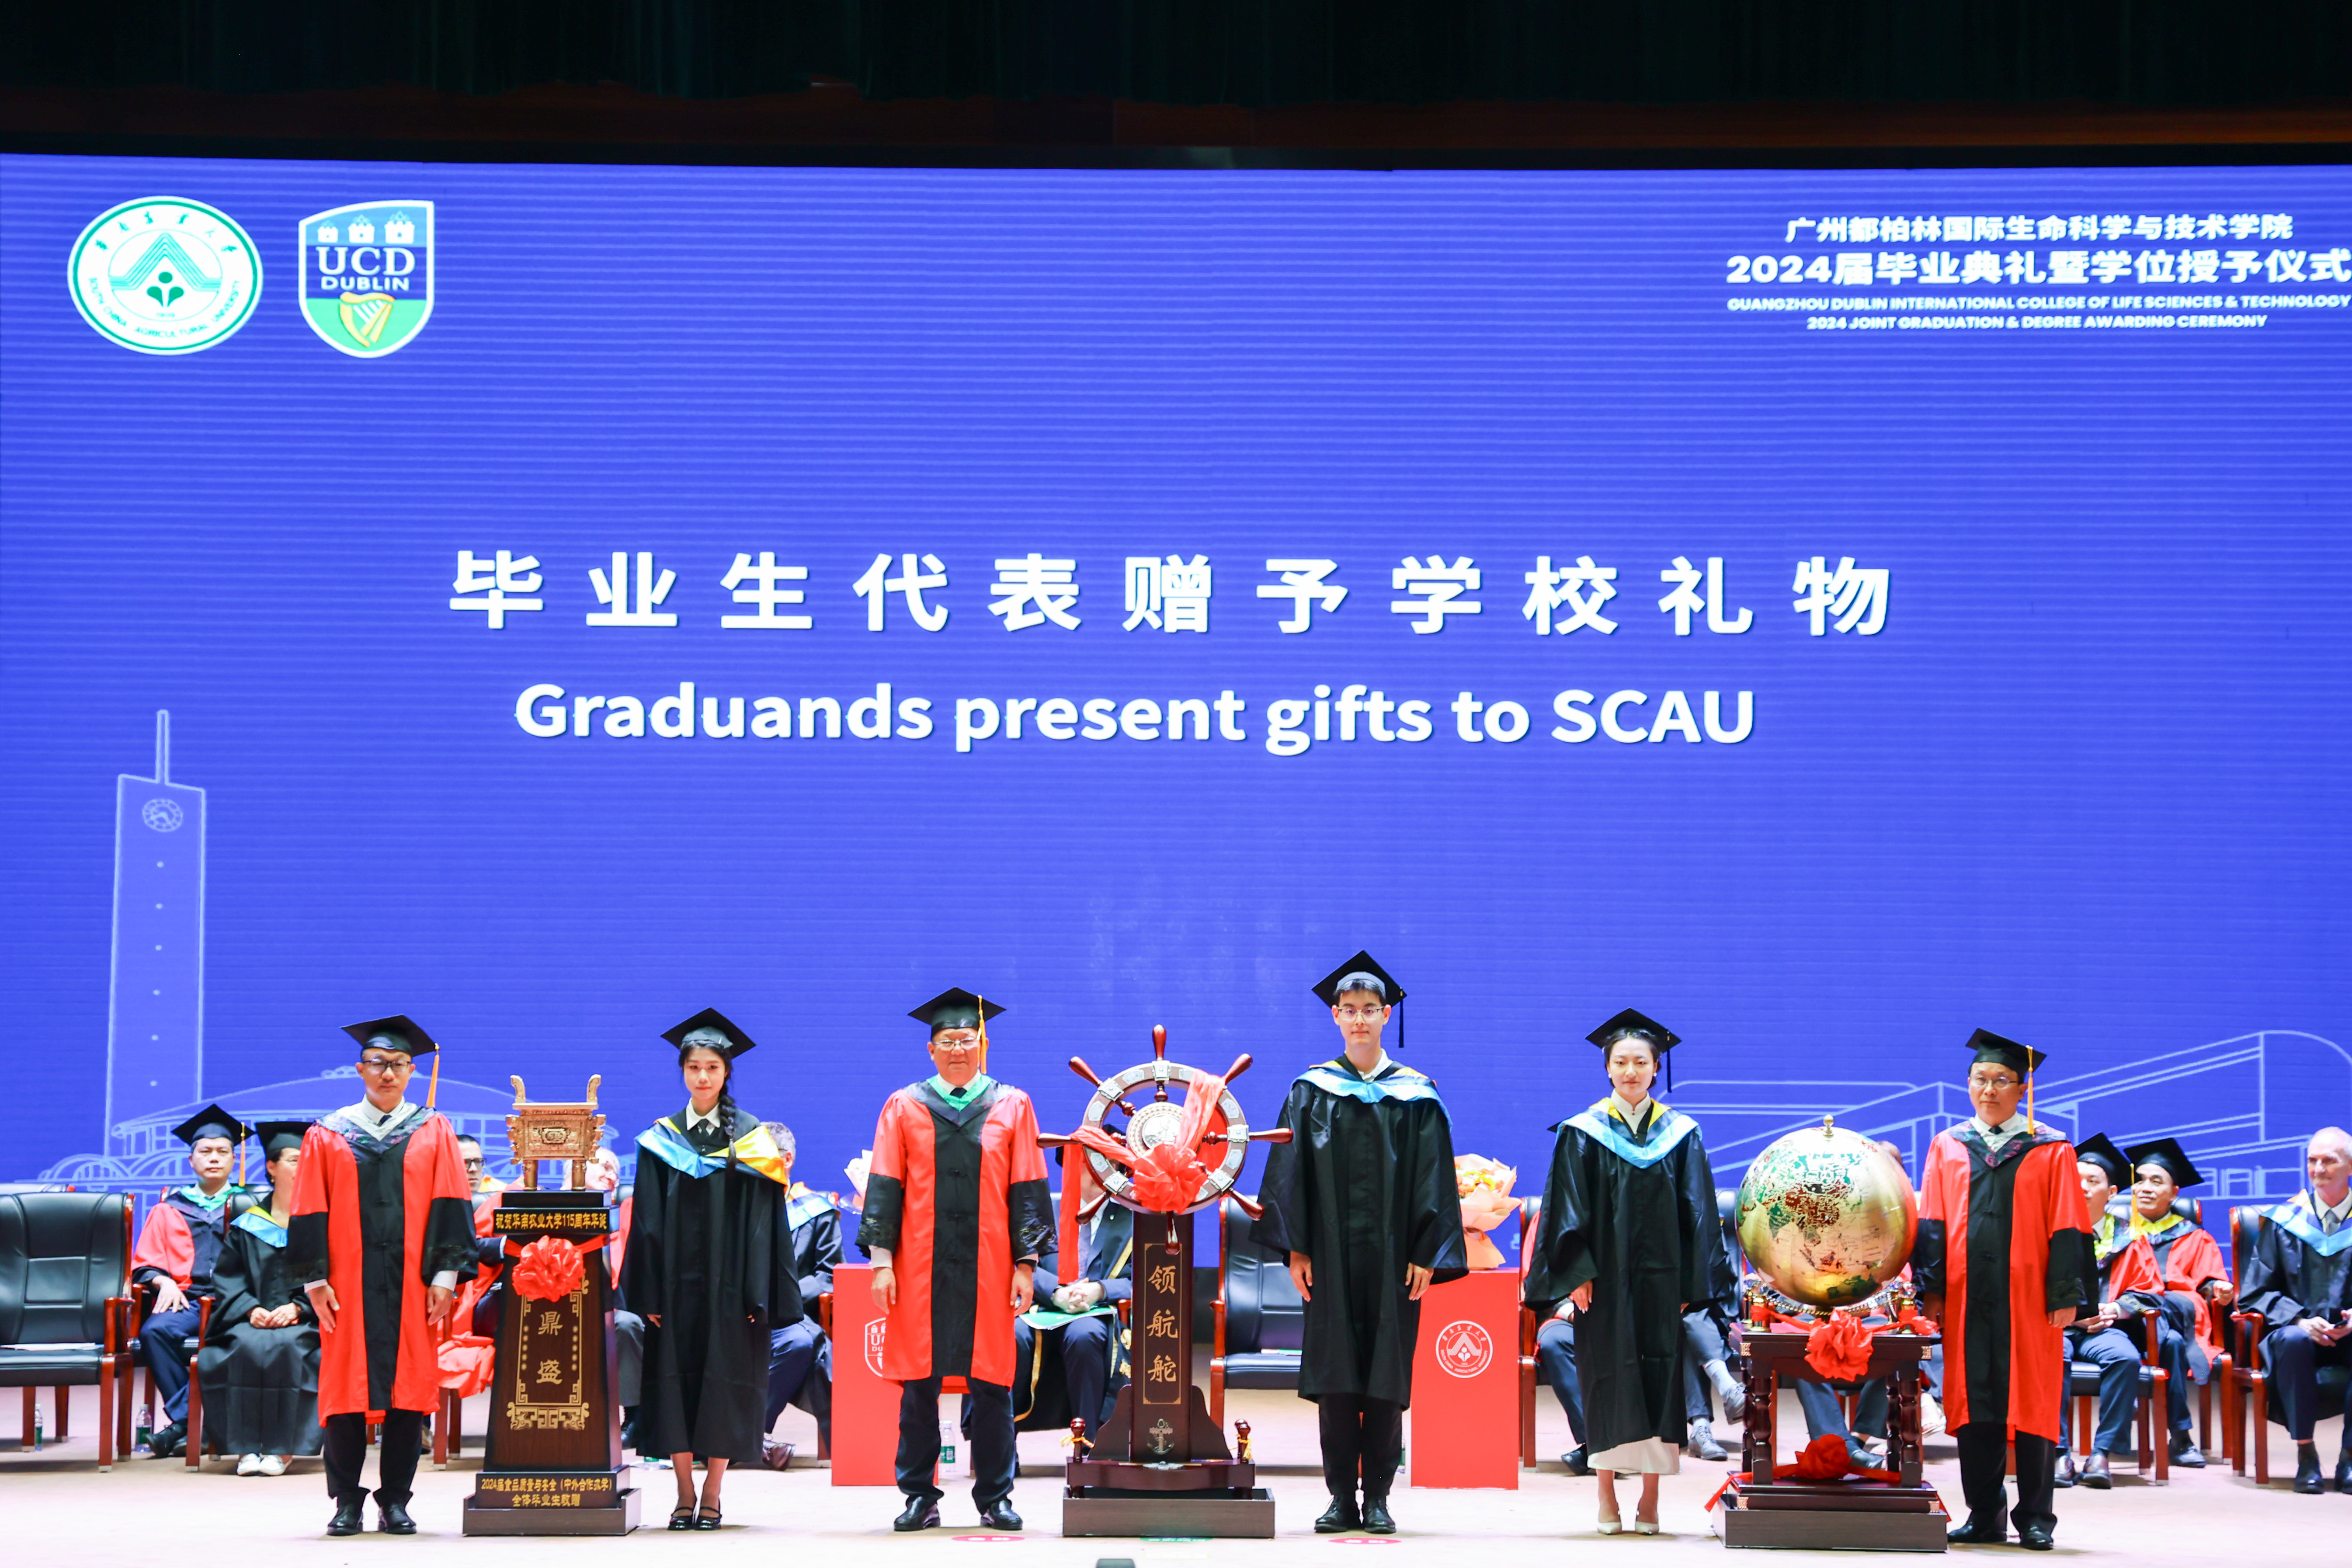 Gifts to SCAU presented by graduates